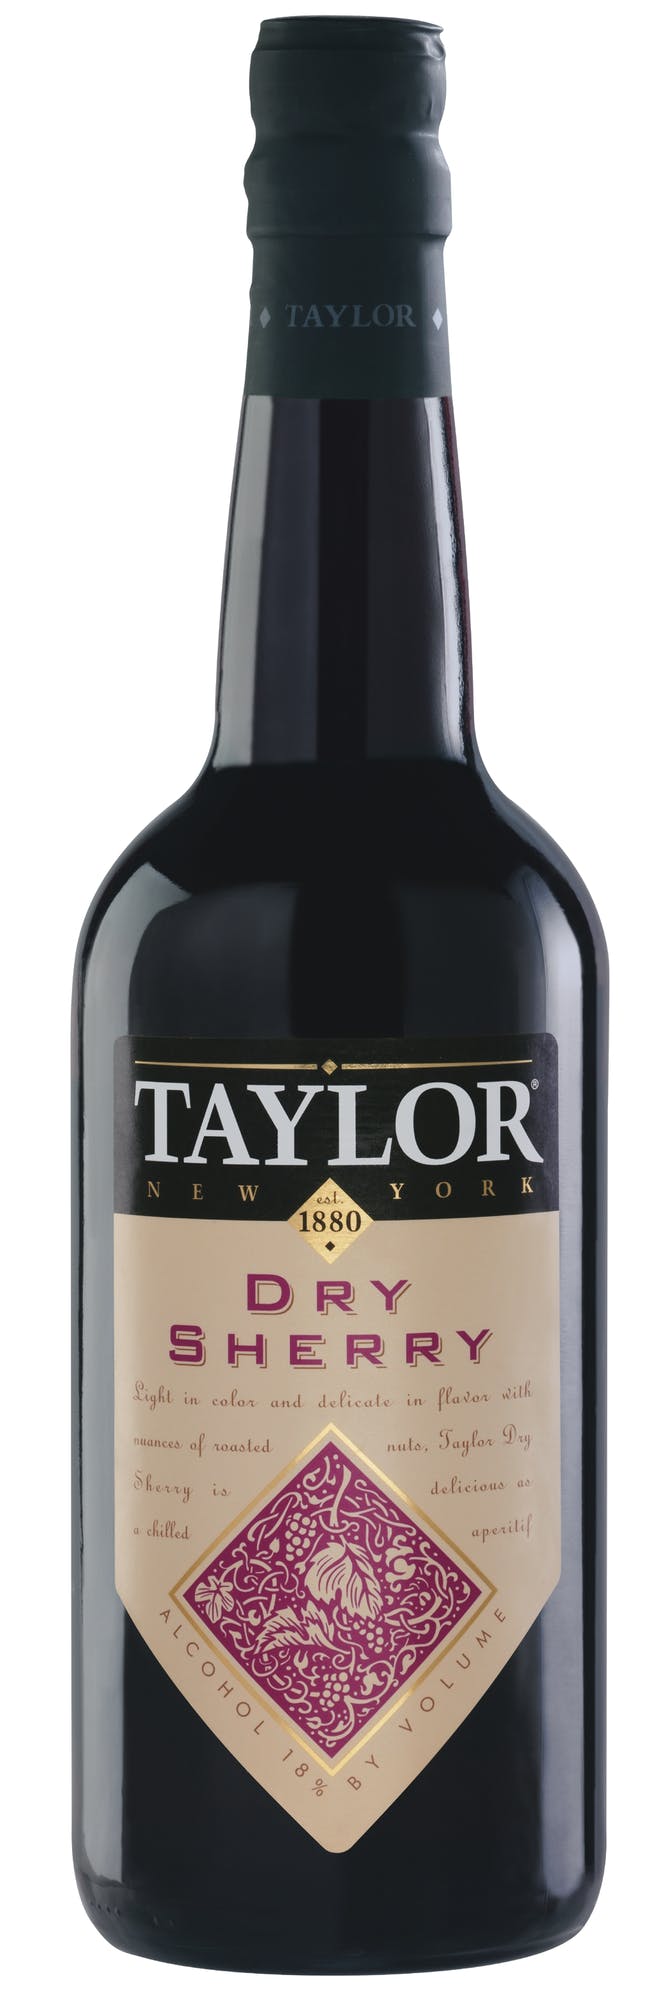 Taylor Dry Sherry Cool Springs Wines And Spirits